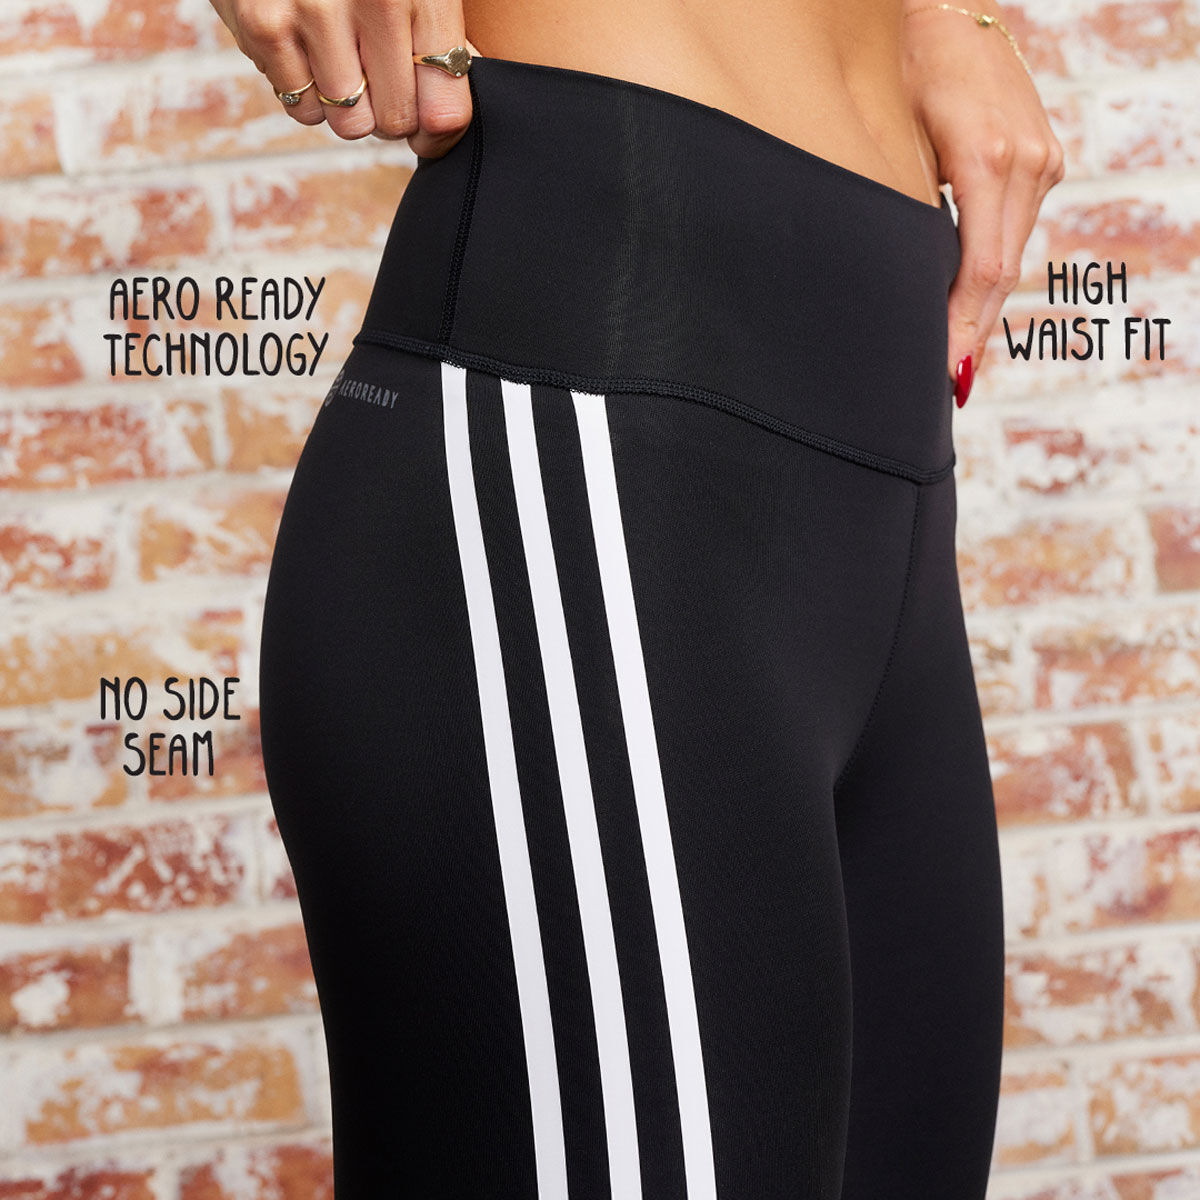 Adidas Mix Fab Tight Womens Black Graphic Yoga Workout Compression Pants,  size M